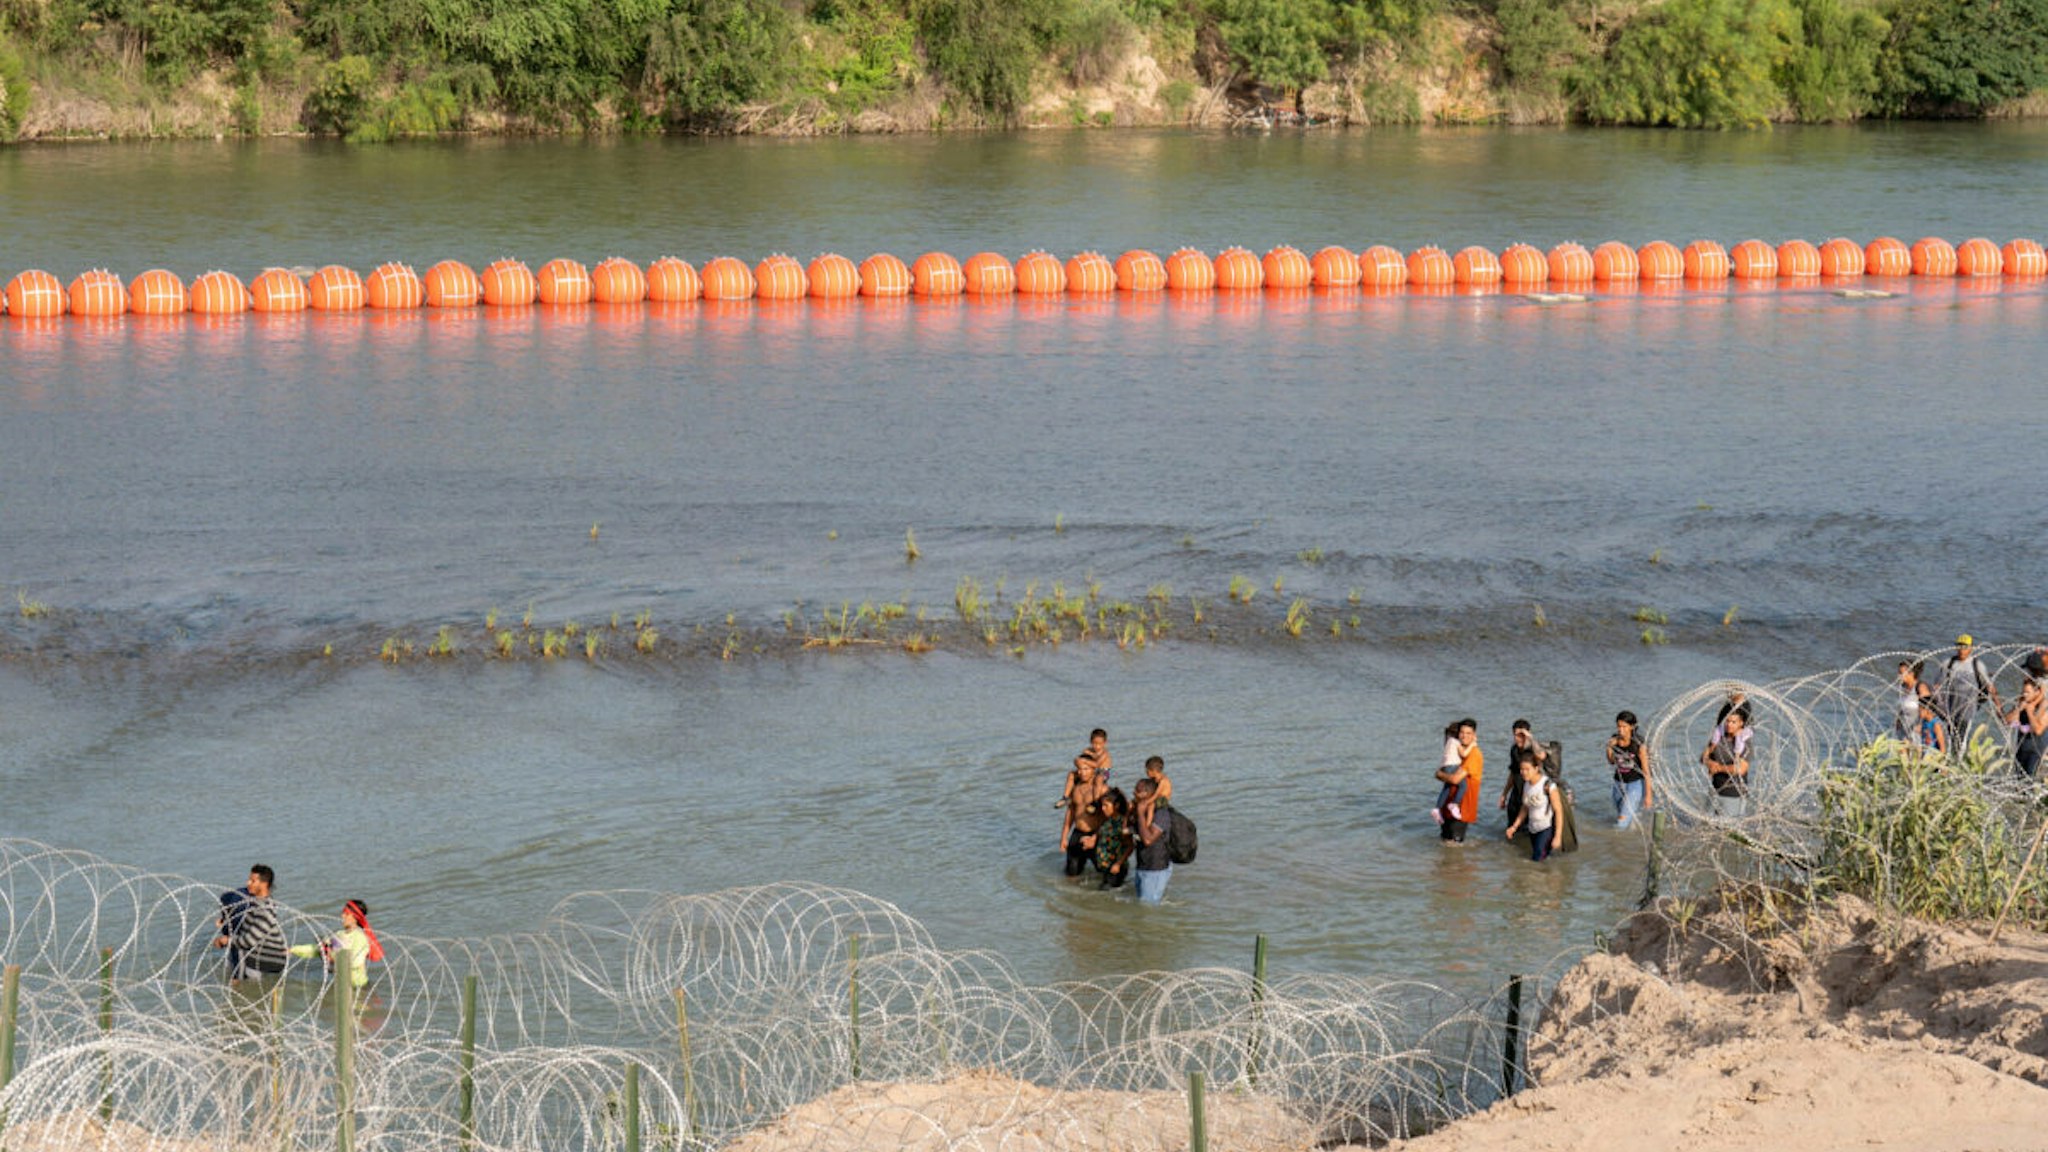 TOPSHOT - Migrants walk by a string of buoys placed on the water along the Rio Grande border with Mexico in Eagle Pass, Texas, on July 16, 2023. The buoy installation is part of an operation Texas is pursuing to secure its borders, but activists and some legislators say Governor Greg Abbott is exceeding his authority.